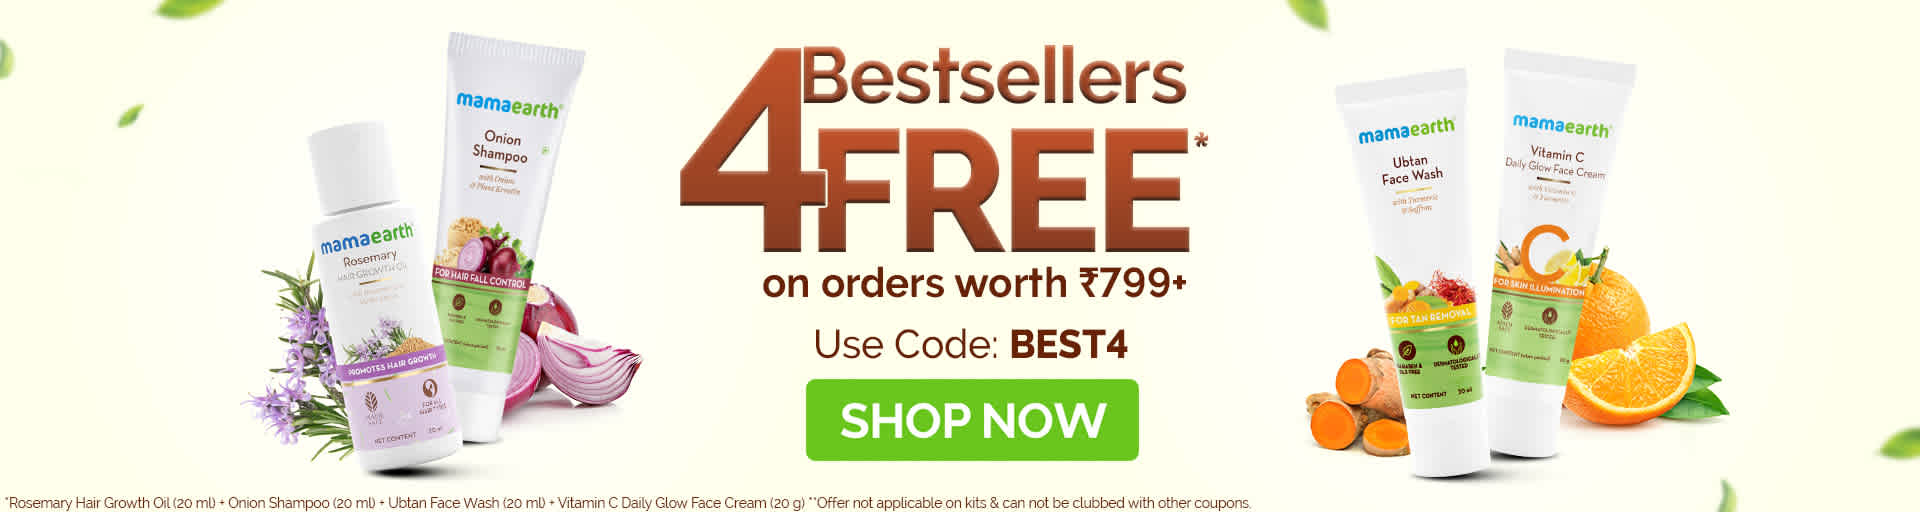 Mamaearth - Mamaearth Coupons : Get 4 Bestsellers Free on Order Above Rs. 799